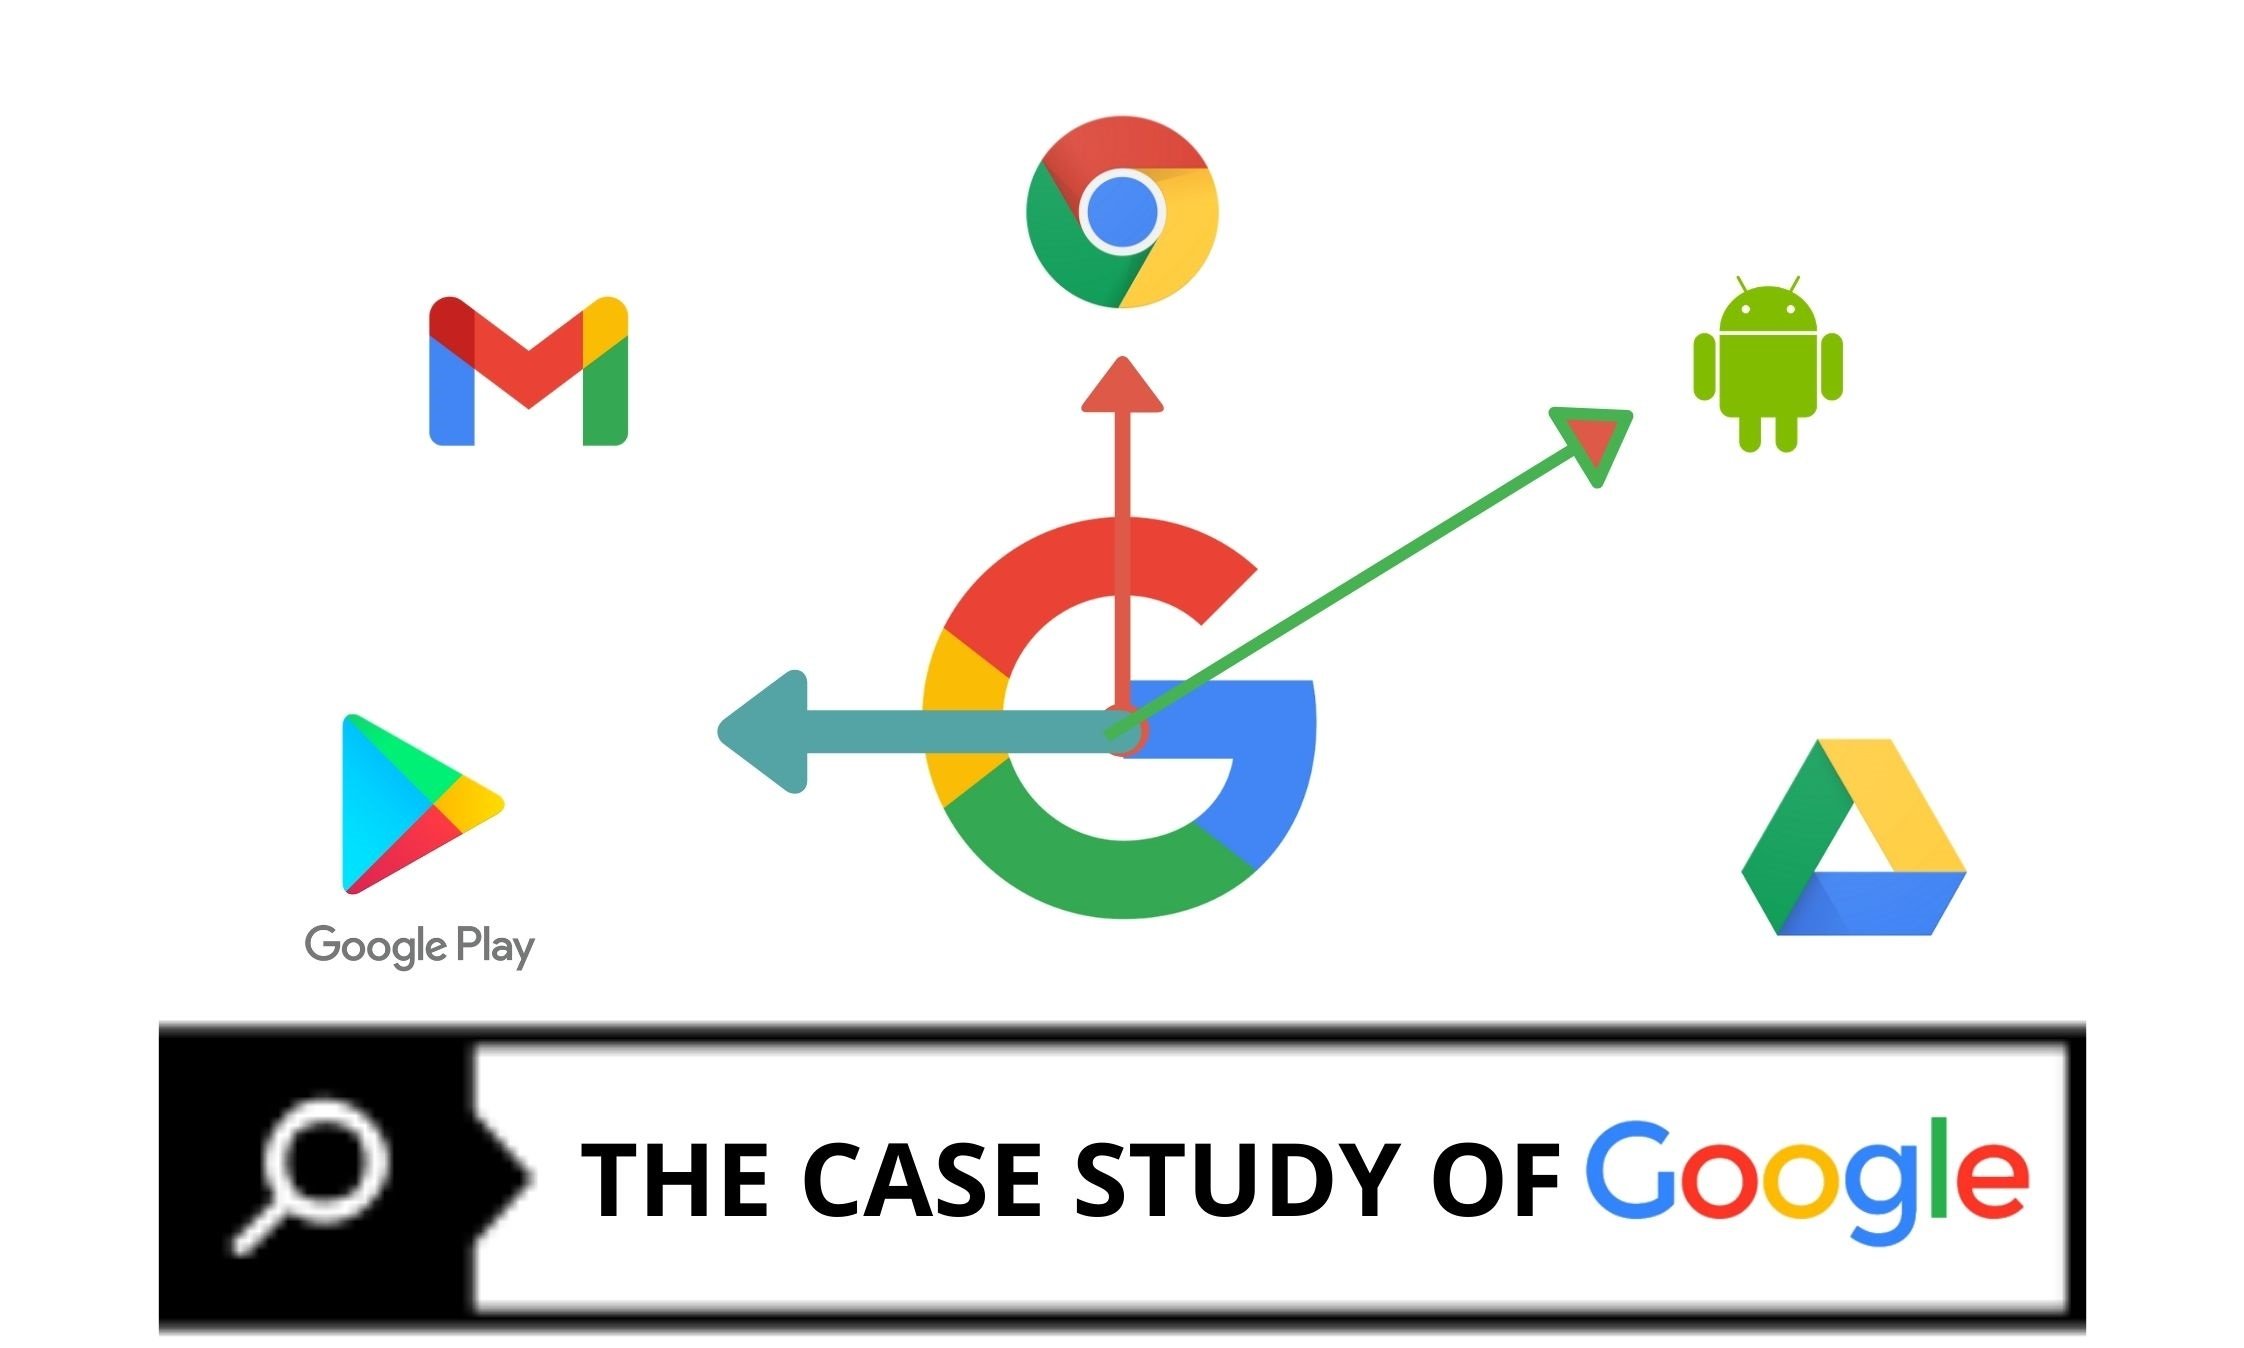 THE CASE STUDY OF GOOGLE